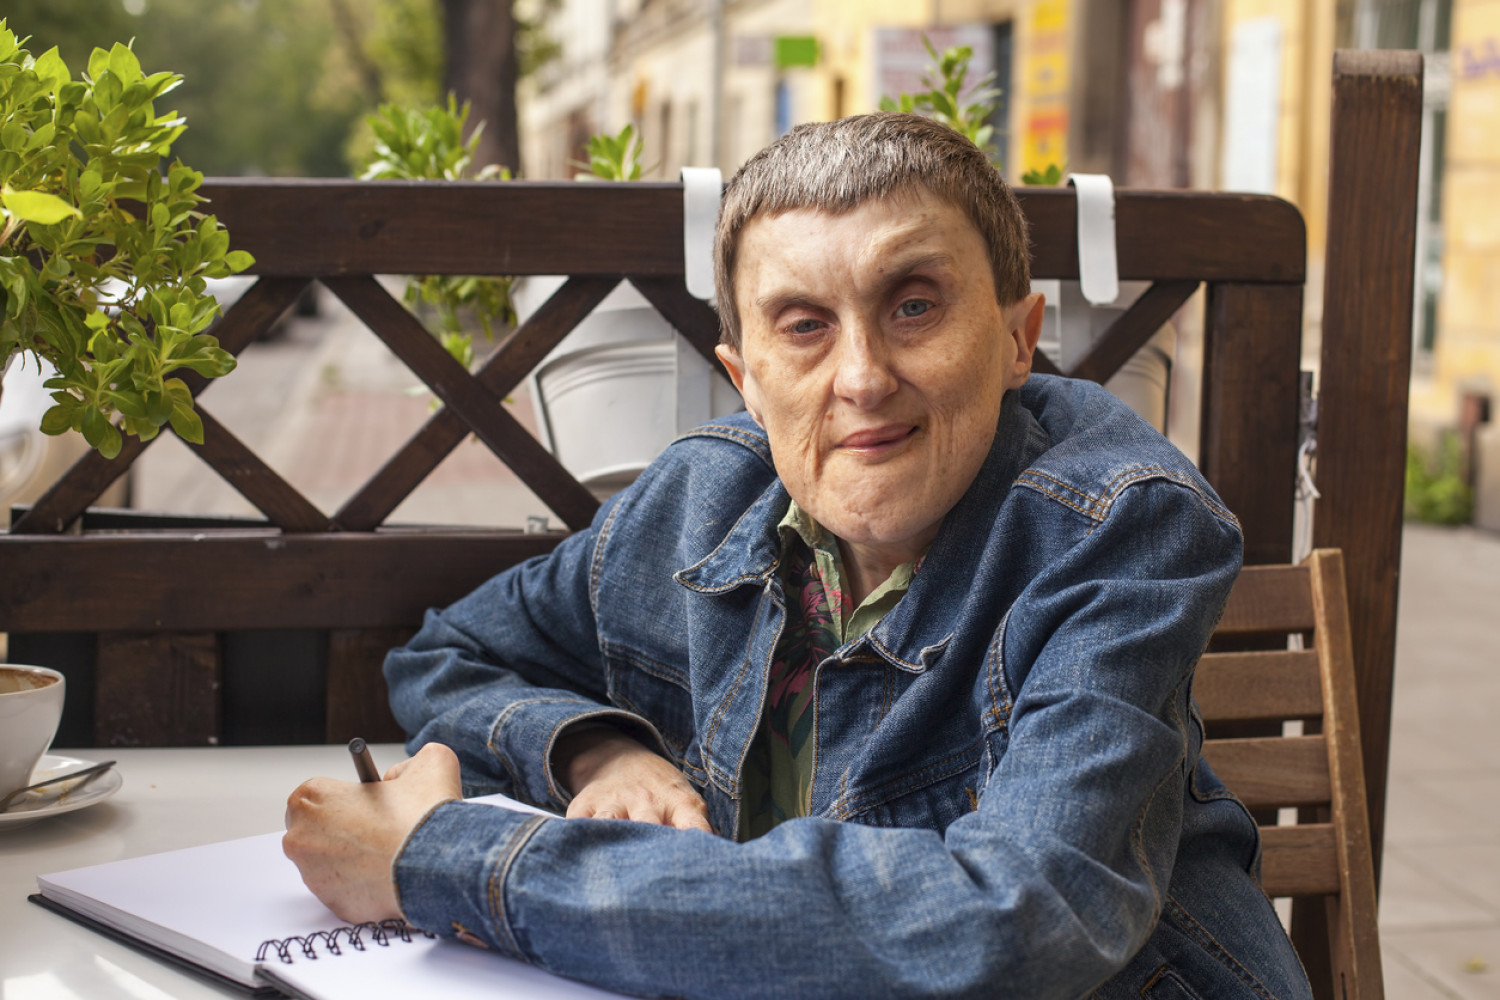 A person with cerebral palsy in a denim jacket sits at an outdoor cafe table, writing in a notebook, exemplifying independence from cerebral palsy support.